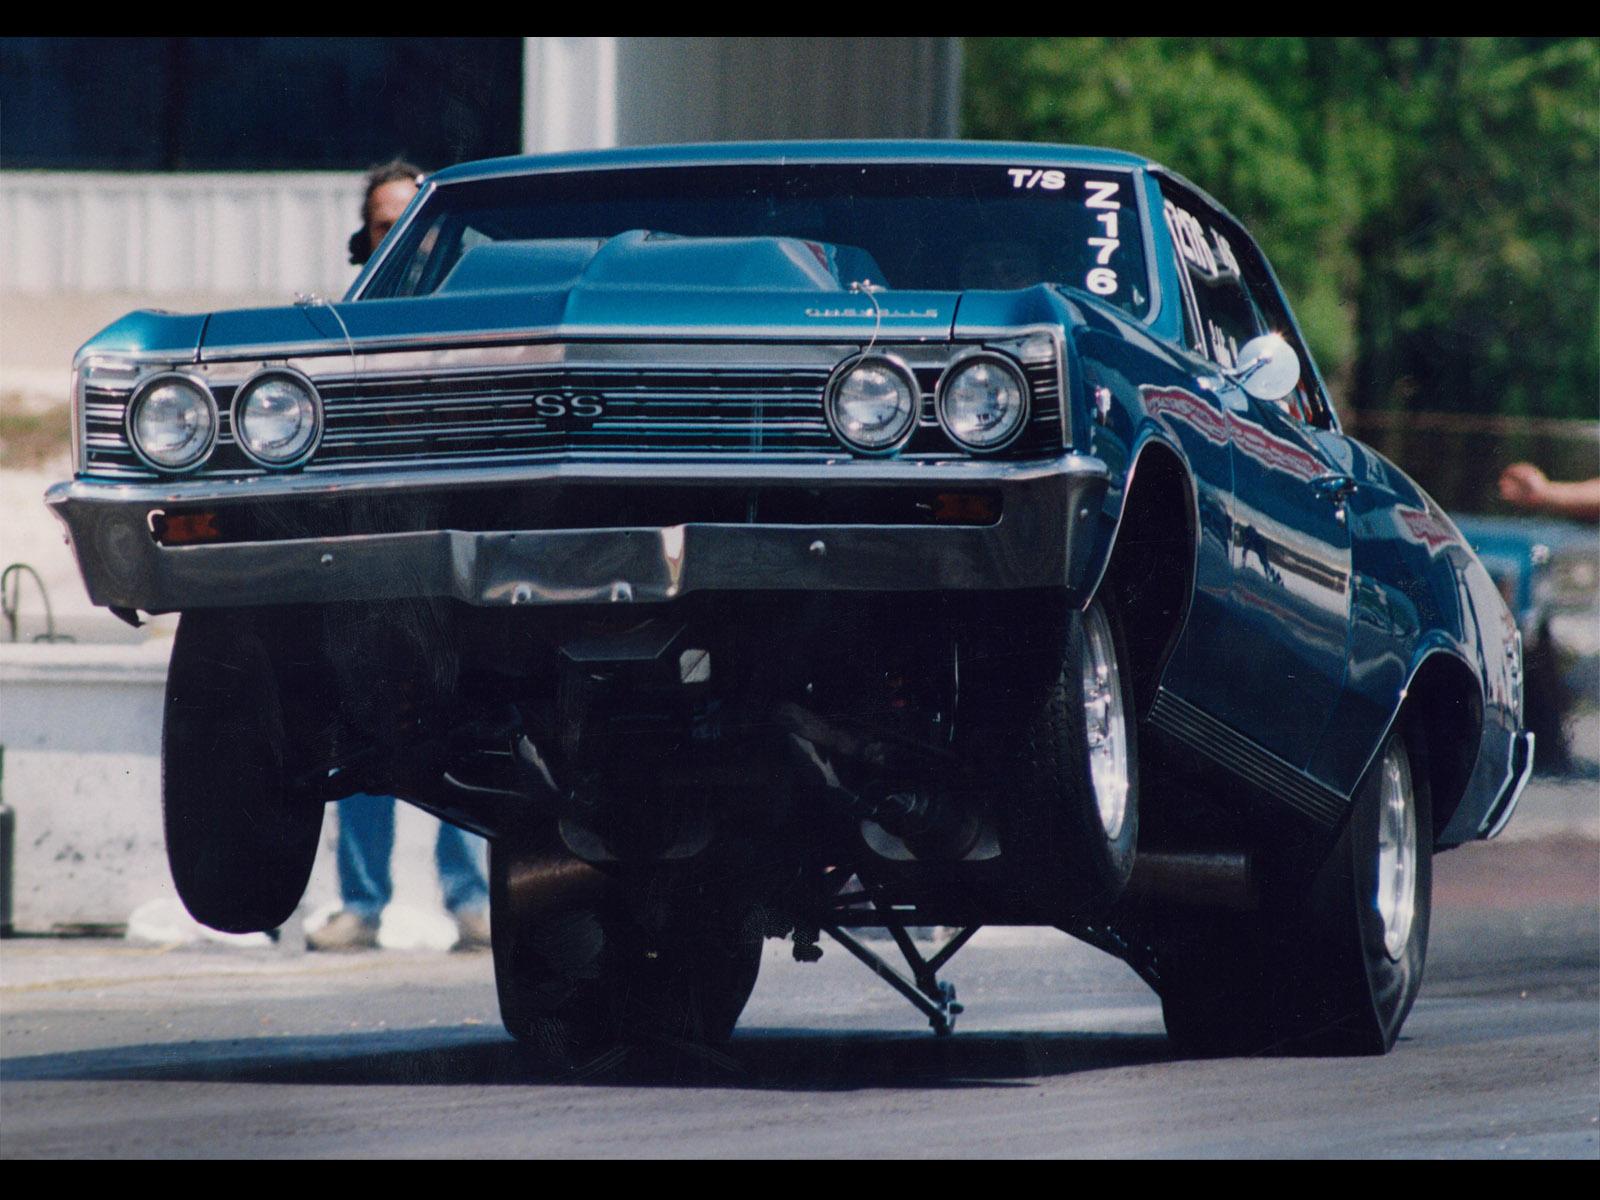 drag, Racing, Hot, Rod, Muscle, Cars, Chevrolet, Chevelle, Track, Racing, Whellie Wallpaper